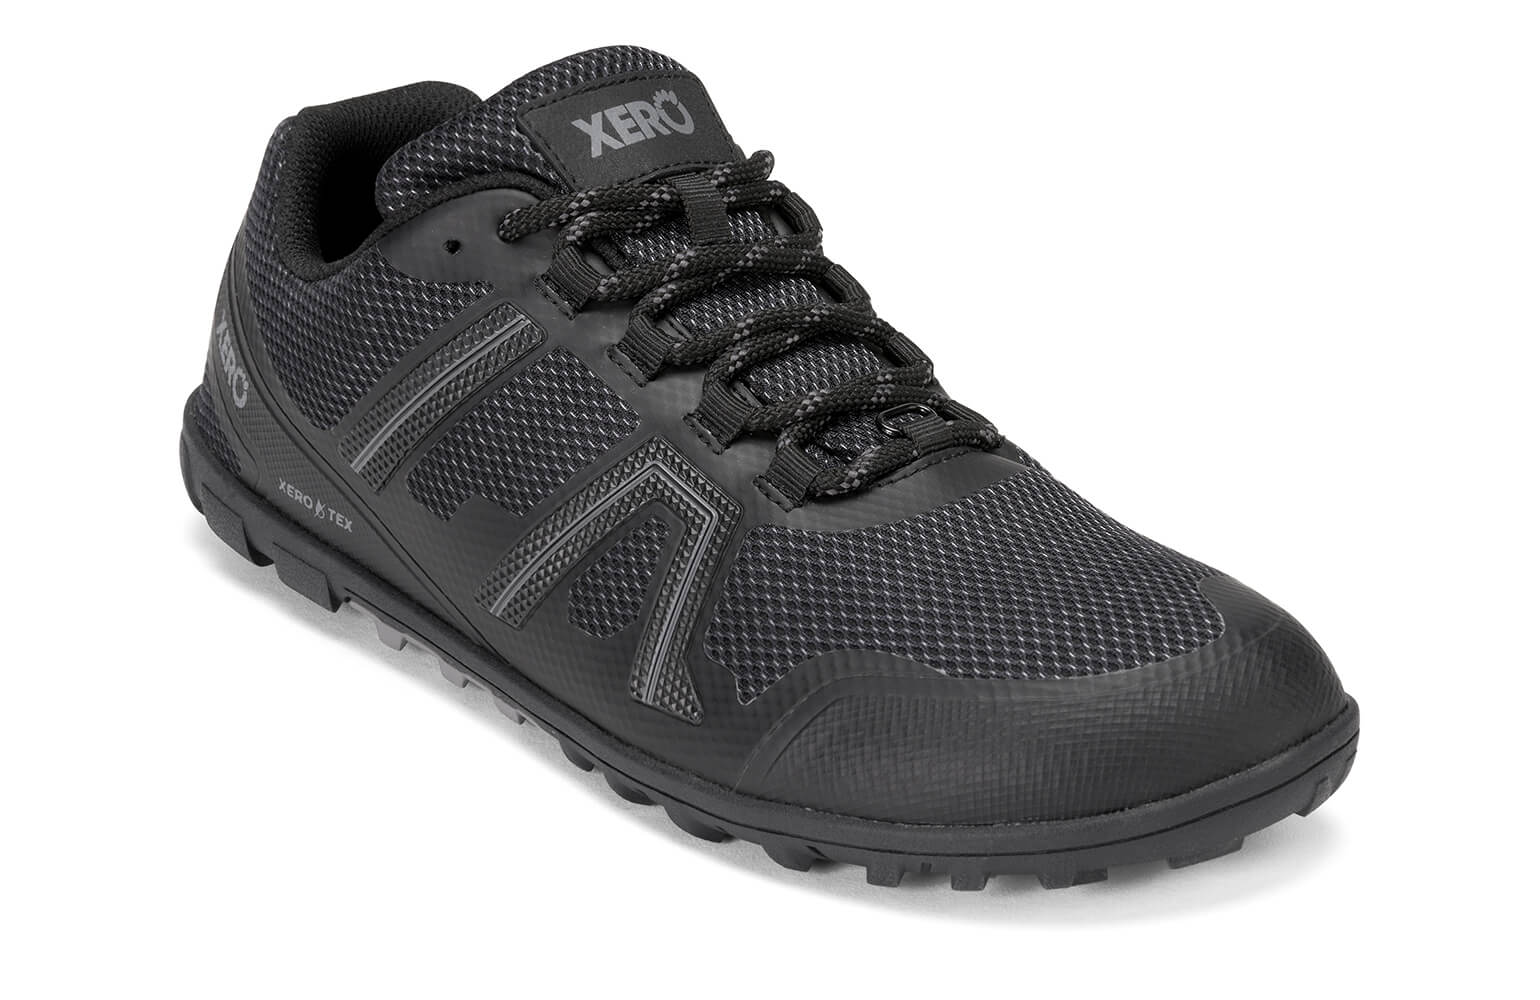 Xero Shoes Kelso Review  Beginner-Friendly Casual Barefoot Shoes?